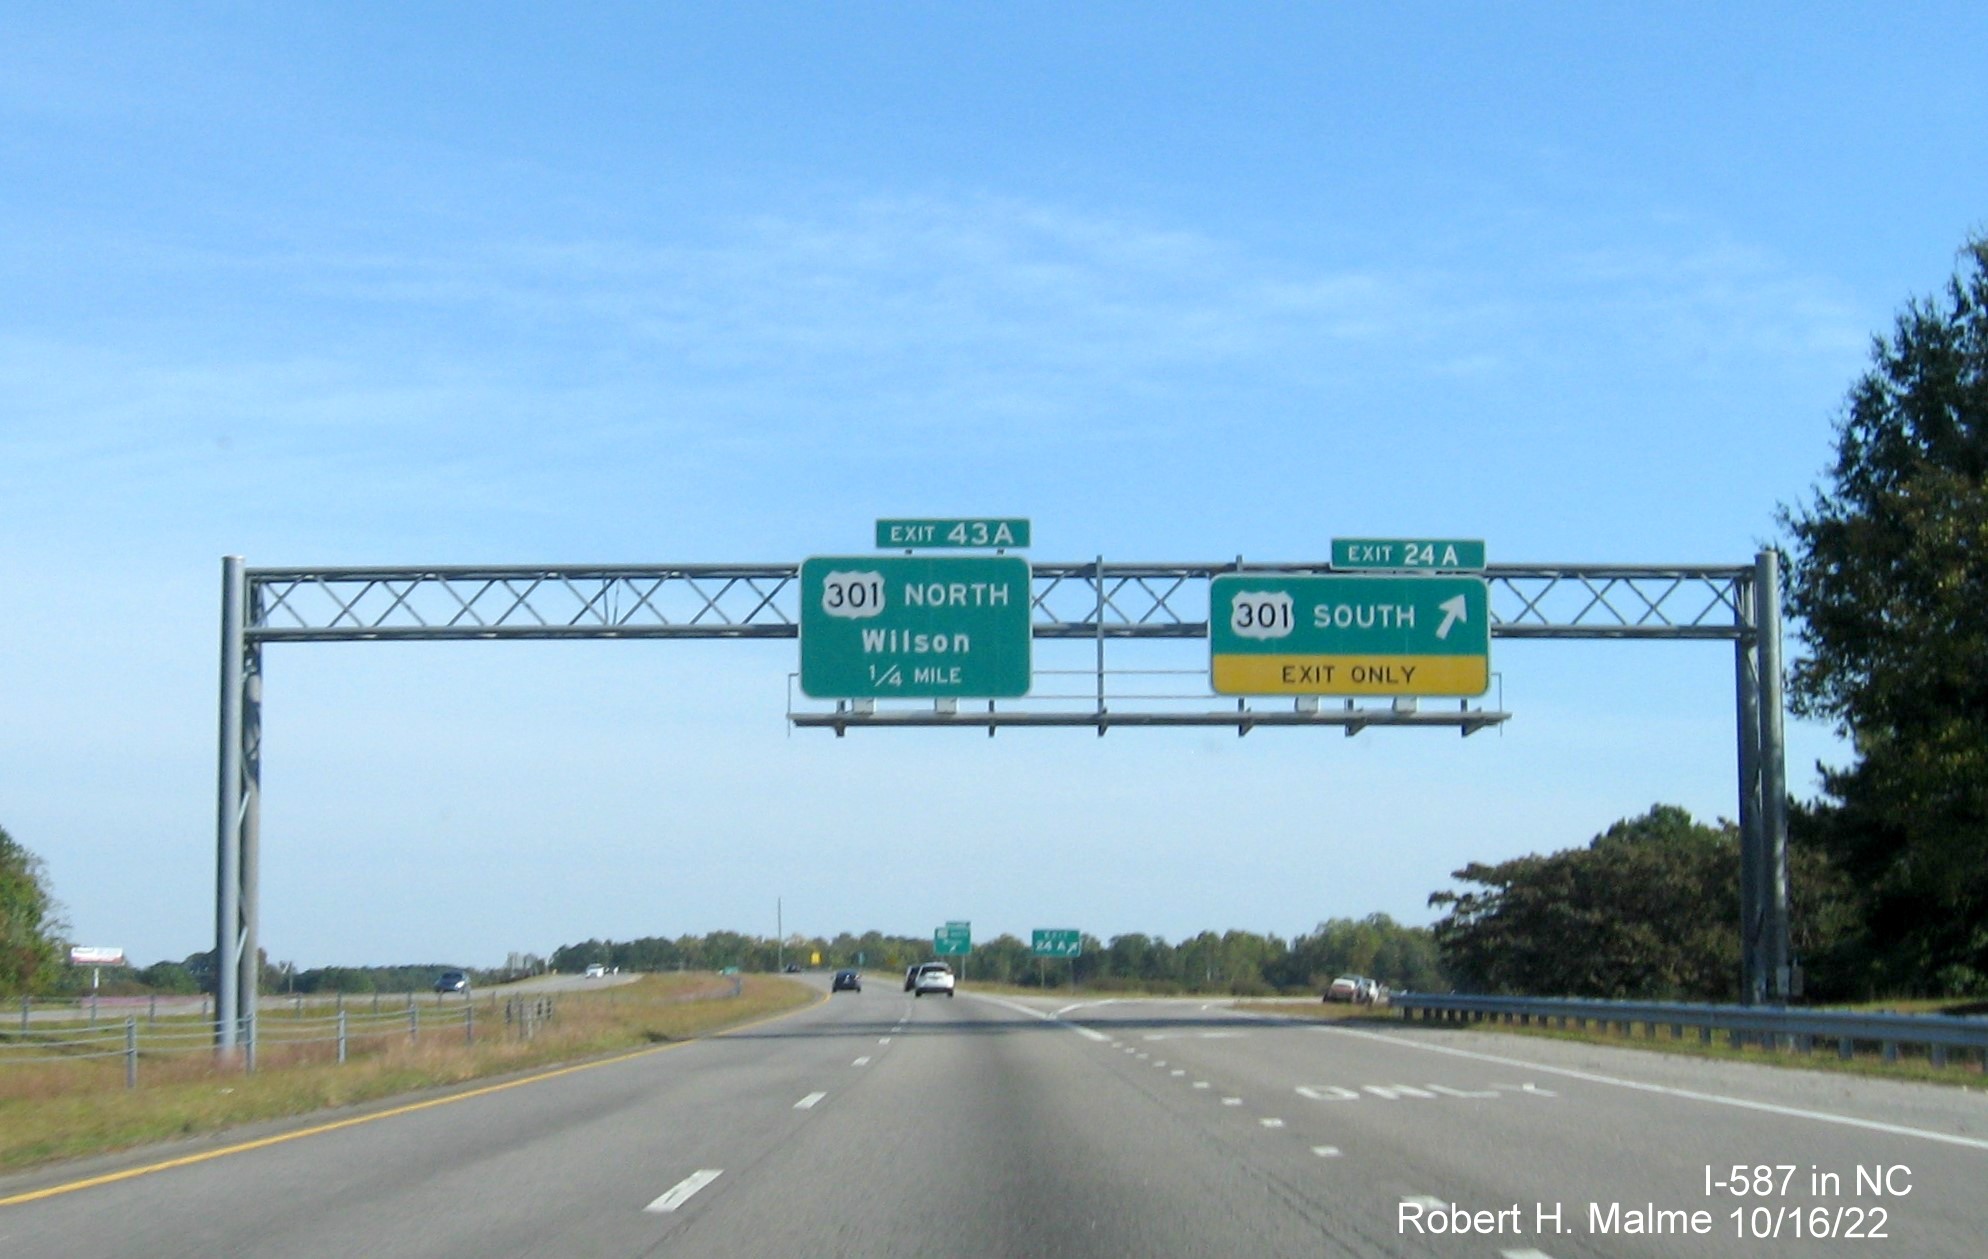 Image of overhead signs at ramp for US 301 South exit with new I-587 milepost exit number on I-587/US 264 East in Wilson, October 2022